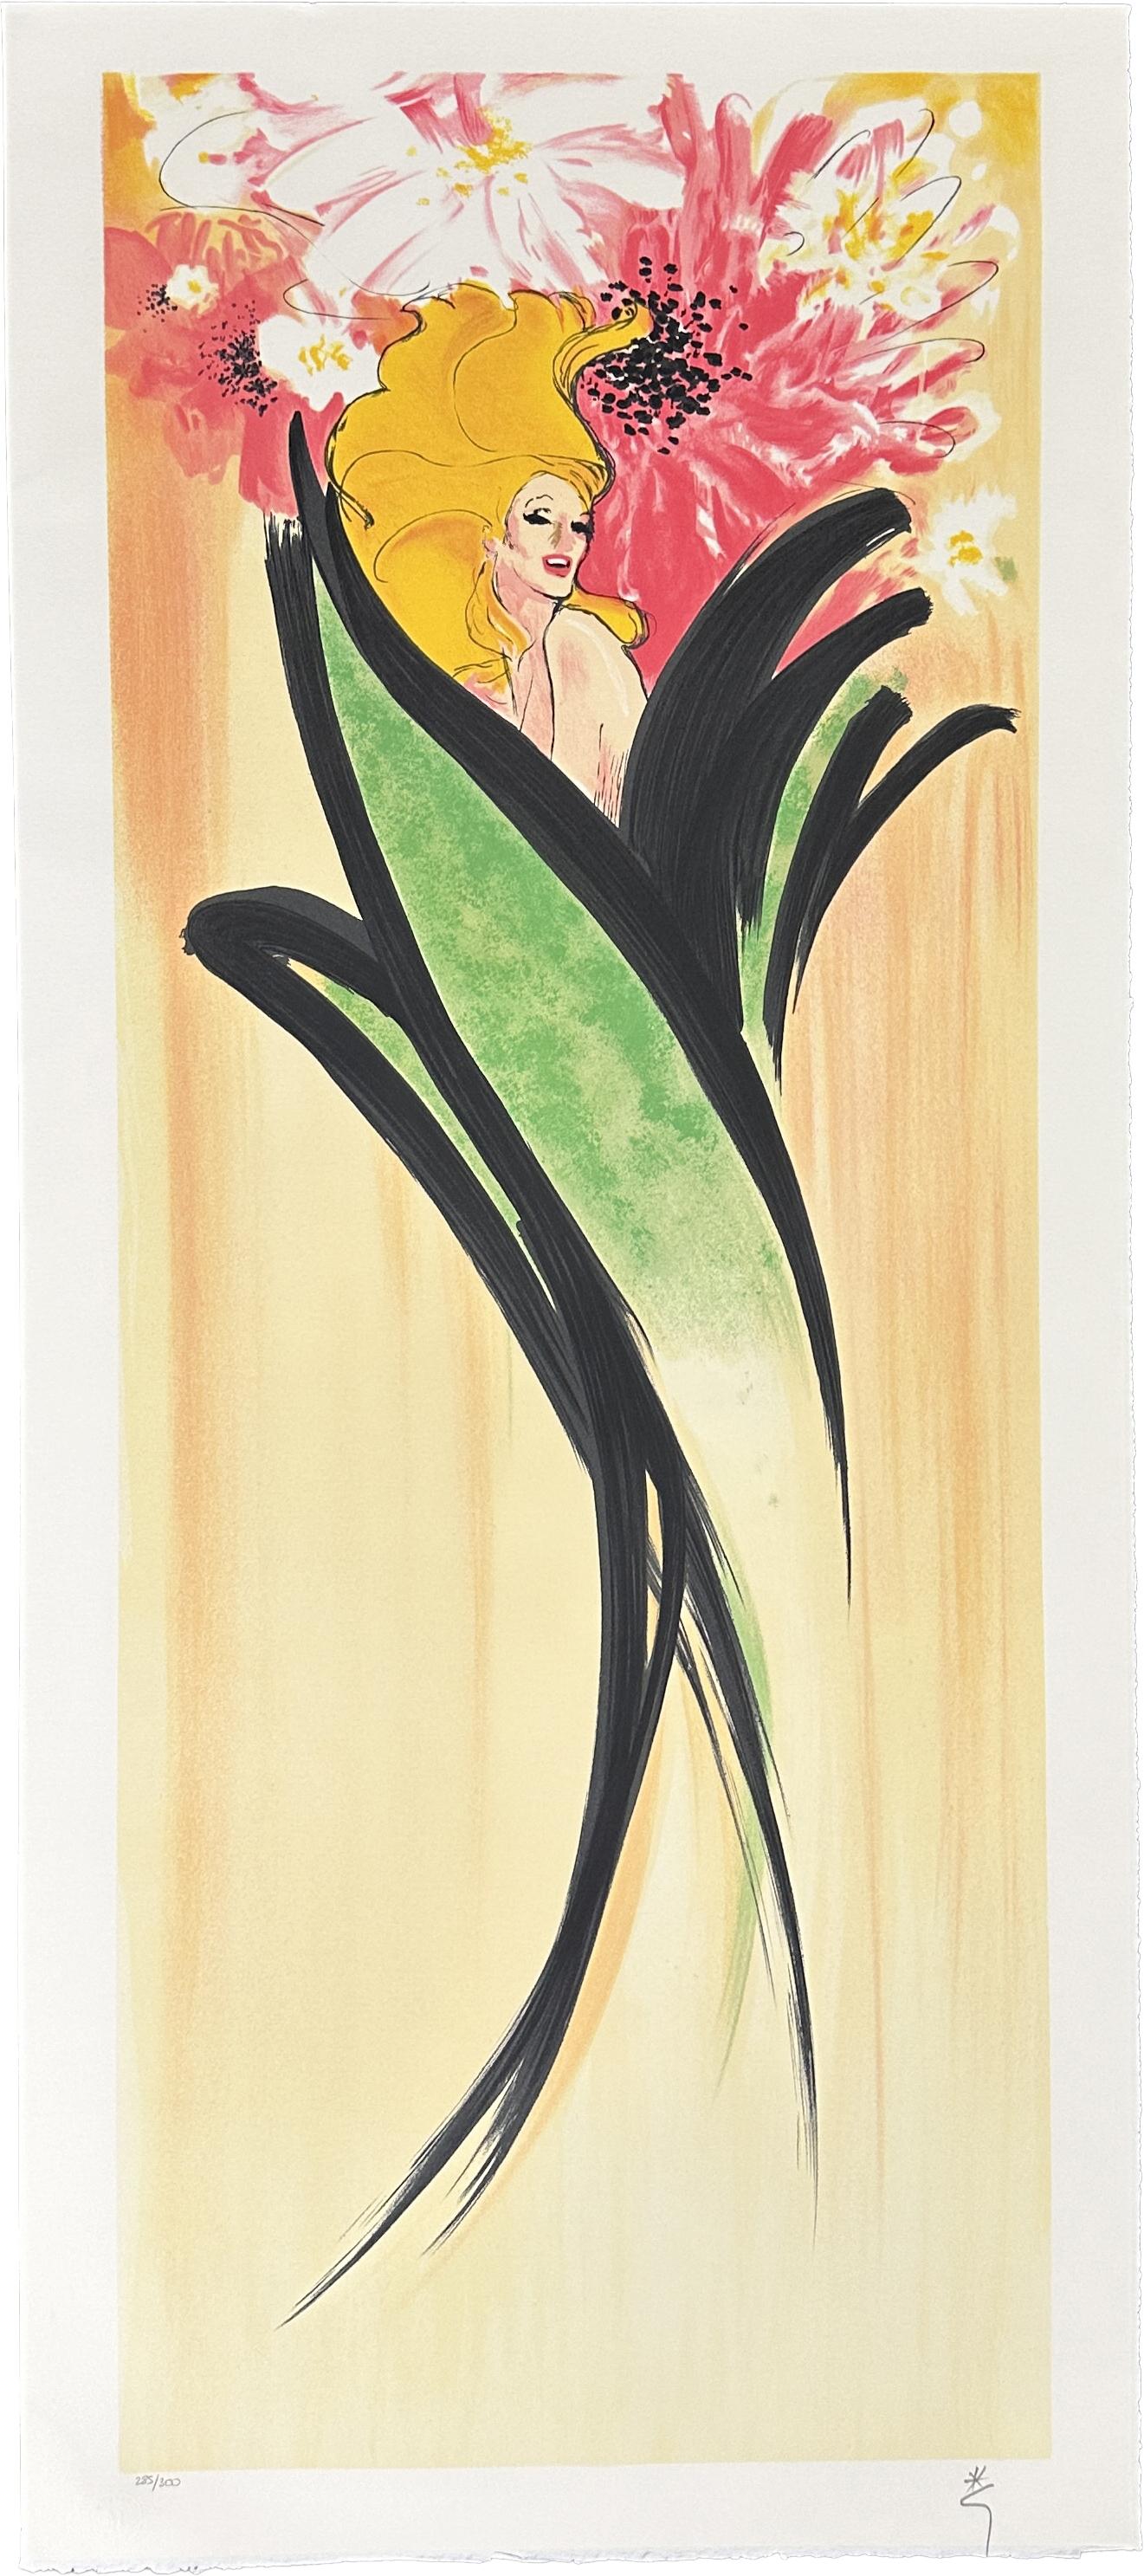 René Gruau 
LES IRIS - 1998 
Print -Lithograph on Arches Archival Paper   
46'' x 20'' inches
Edition: signed in pencil, titled and marked 285/300 
Embossed with the printers stamp Mourlot, Paris


René Gruau, an Italian-born artist who made his